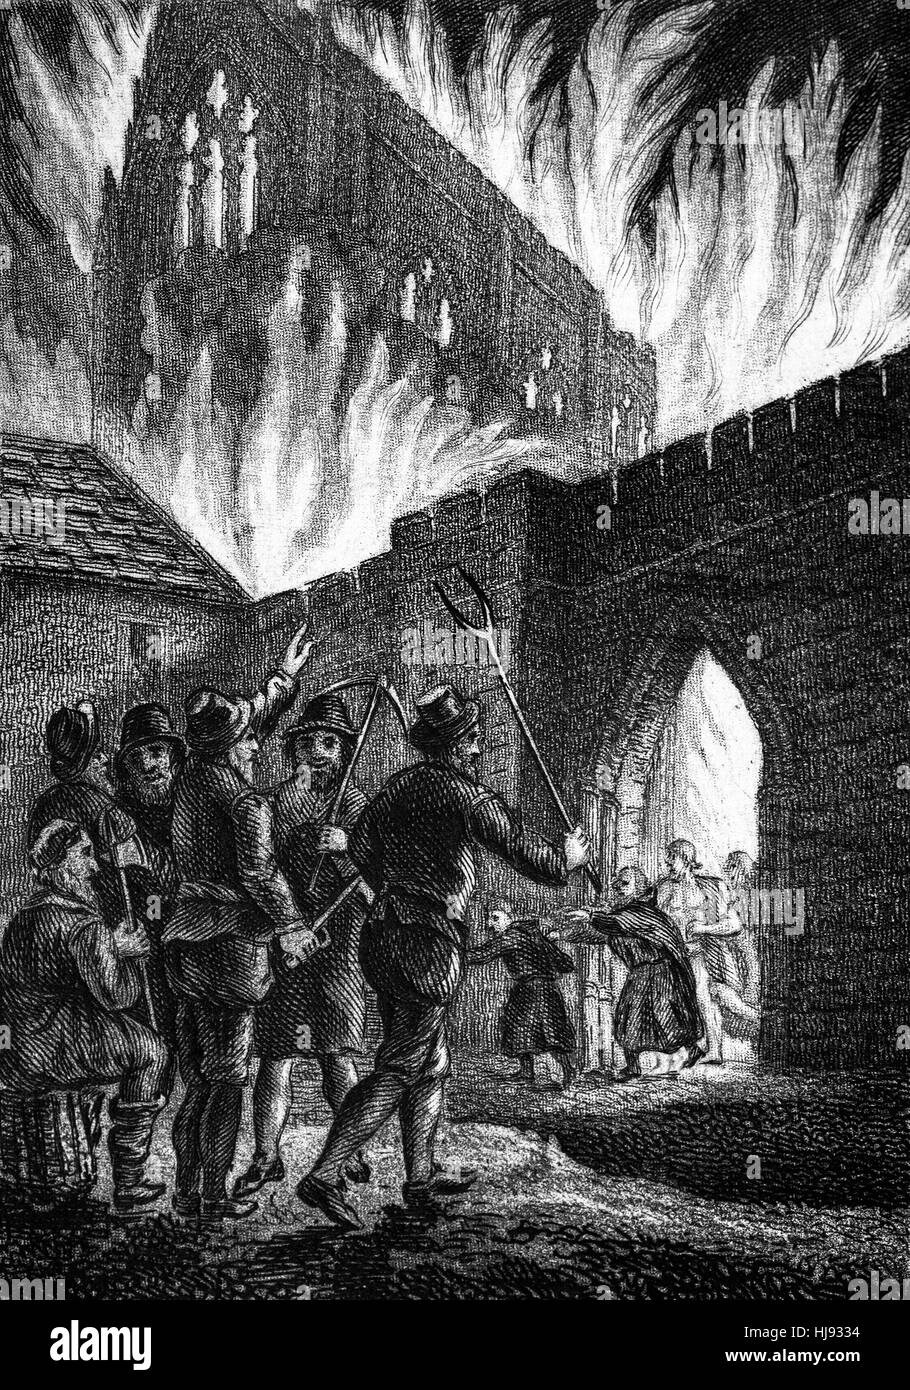 The Burning of St John's Monastery, near Smithfield,  Colchester, Essex, by Wat Tyler's Rabble, 1381 during the Peasants' Revolt. Stock Photo